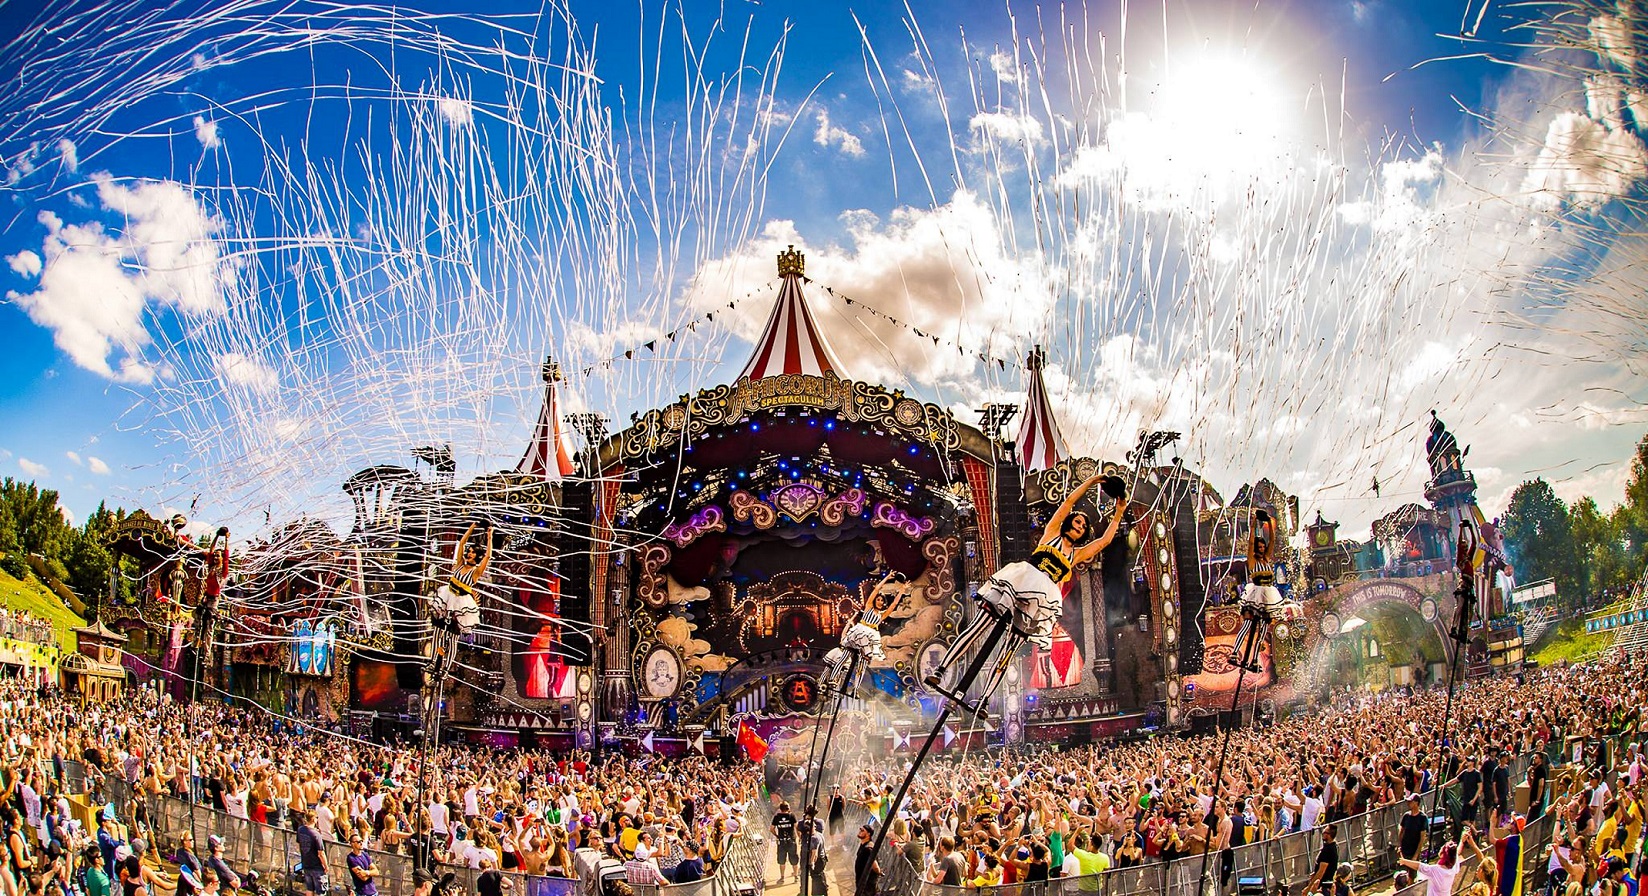 Tomorrowland is another day